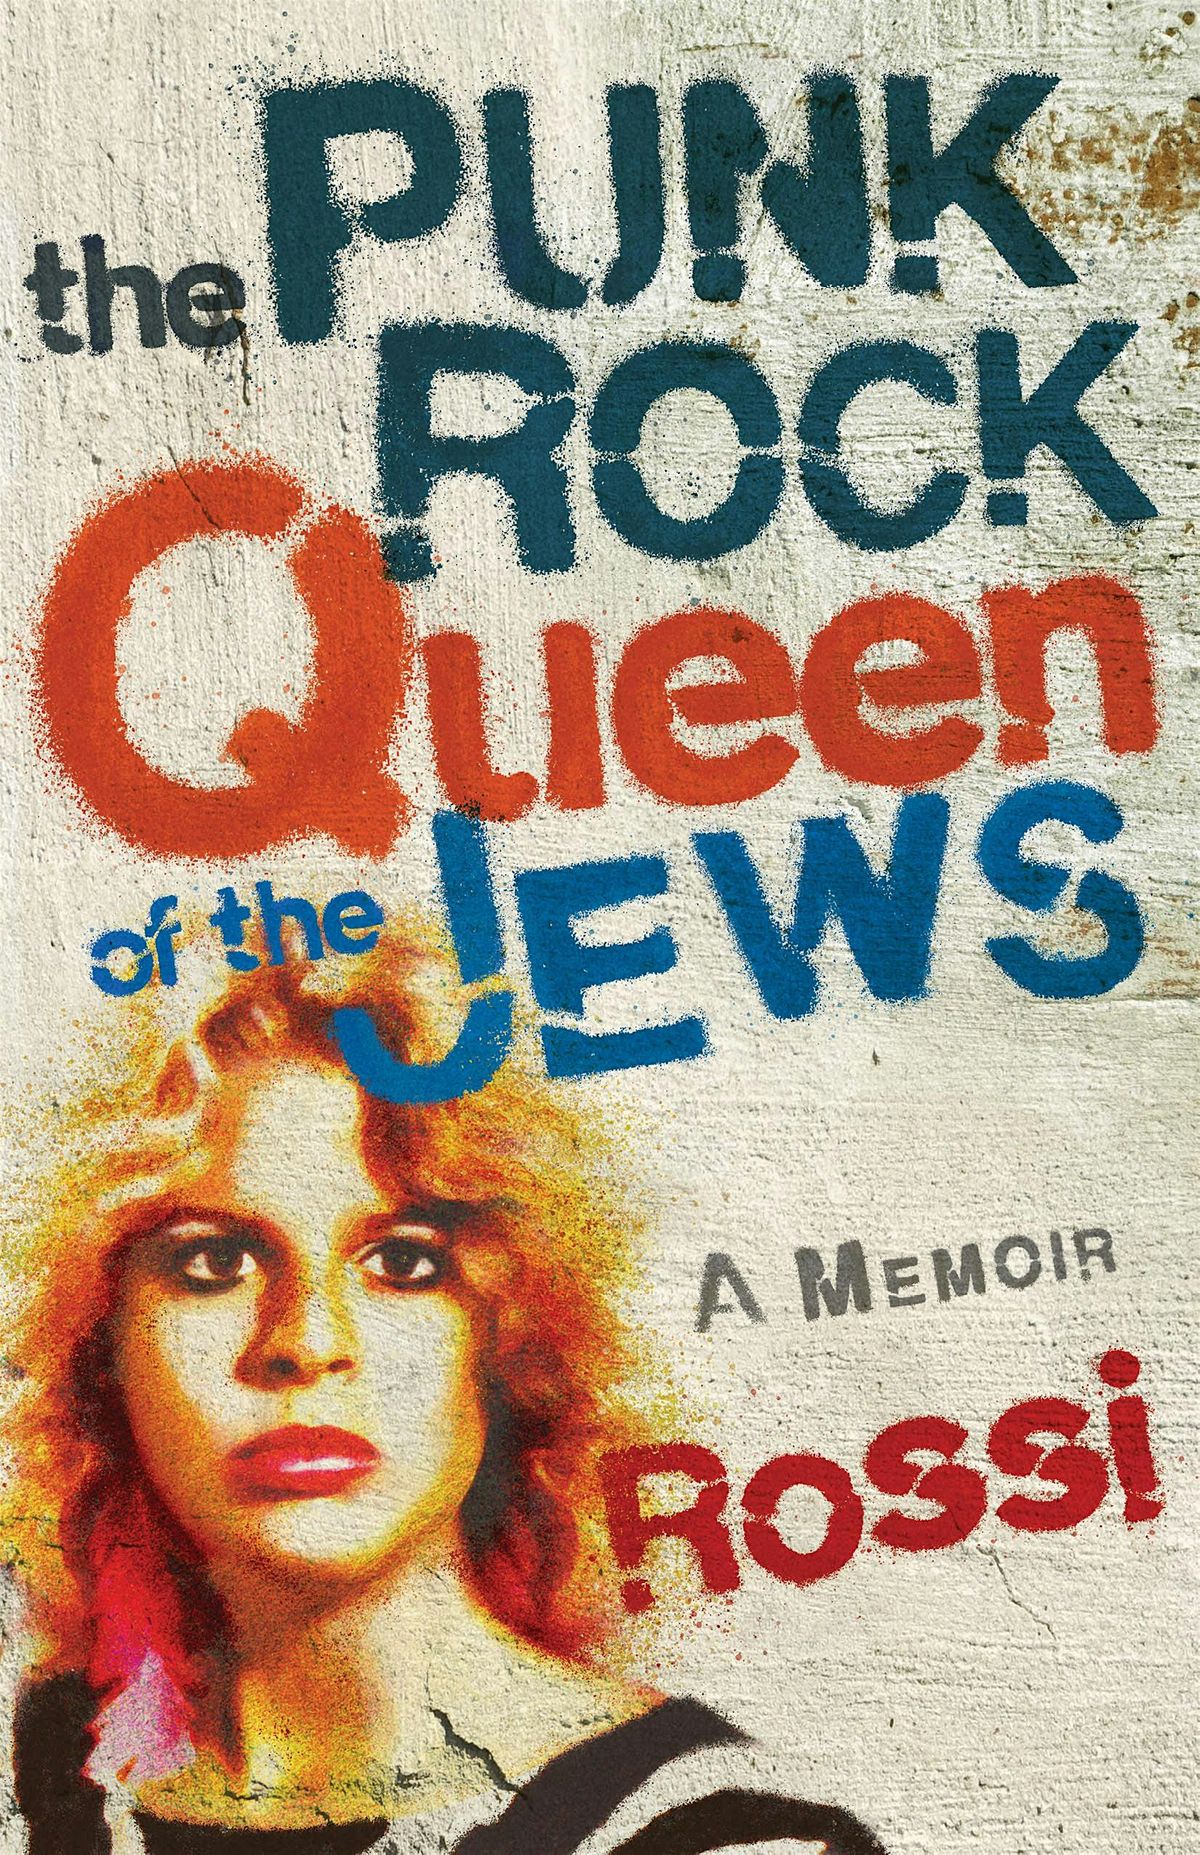 Chef Rossi: The Punk-Rock Queen of the Jews: A Memoir 8\/15 - 6pm